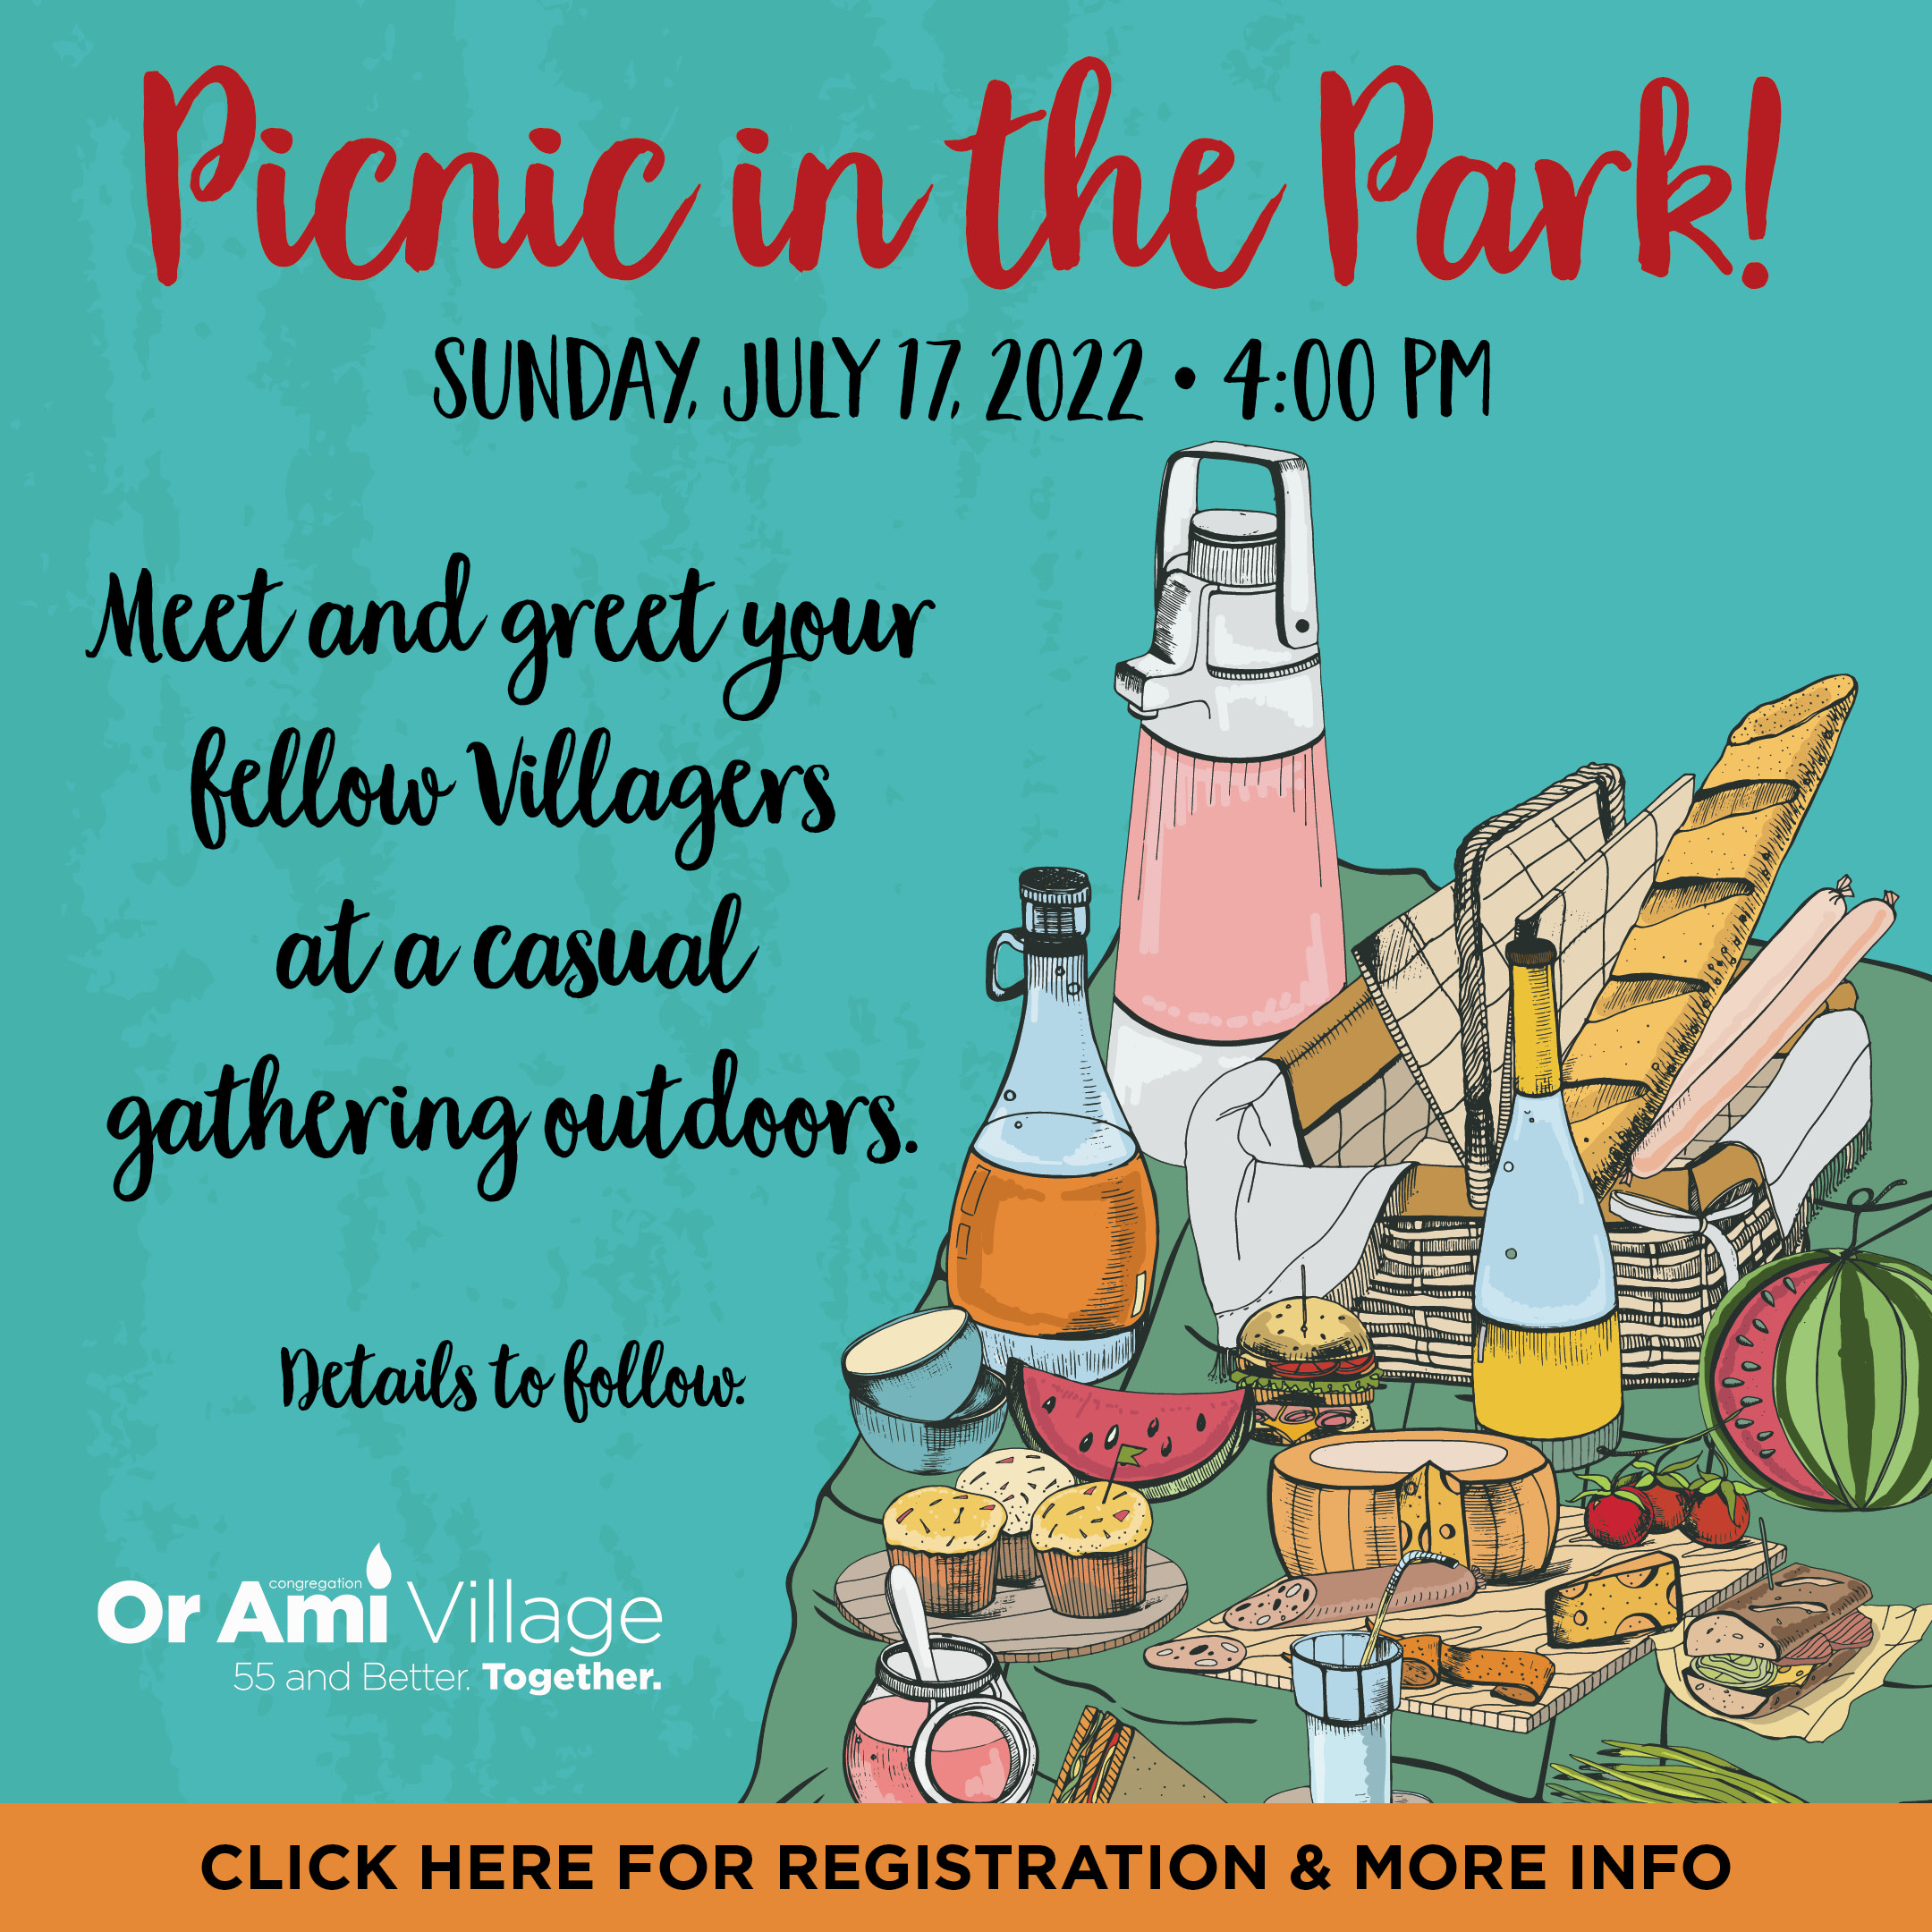 Or Ami Picnic in the Park June 12 2022 CLICK